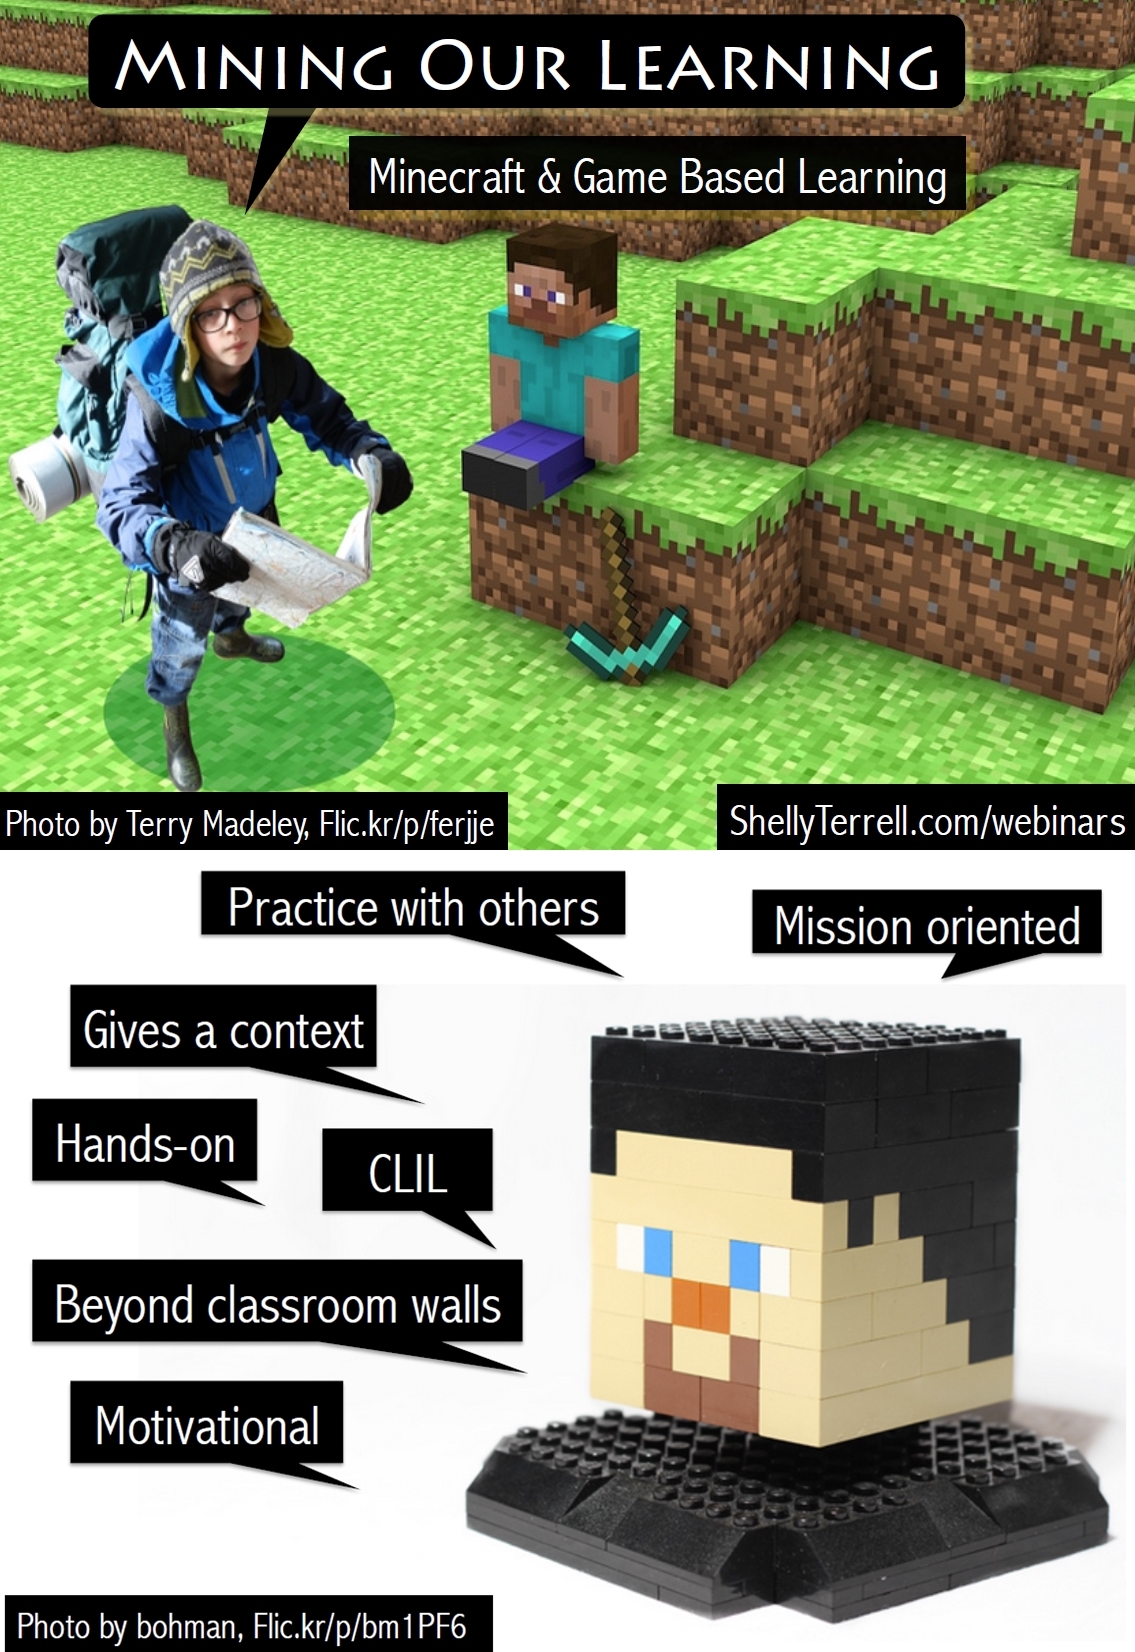 American TESOL Webinar - Mining Our Learning, Minecraft & Game Based Learning